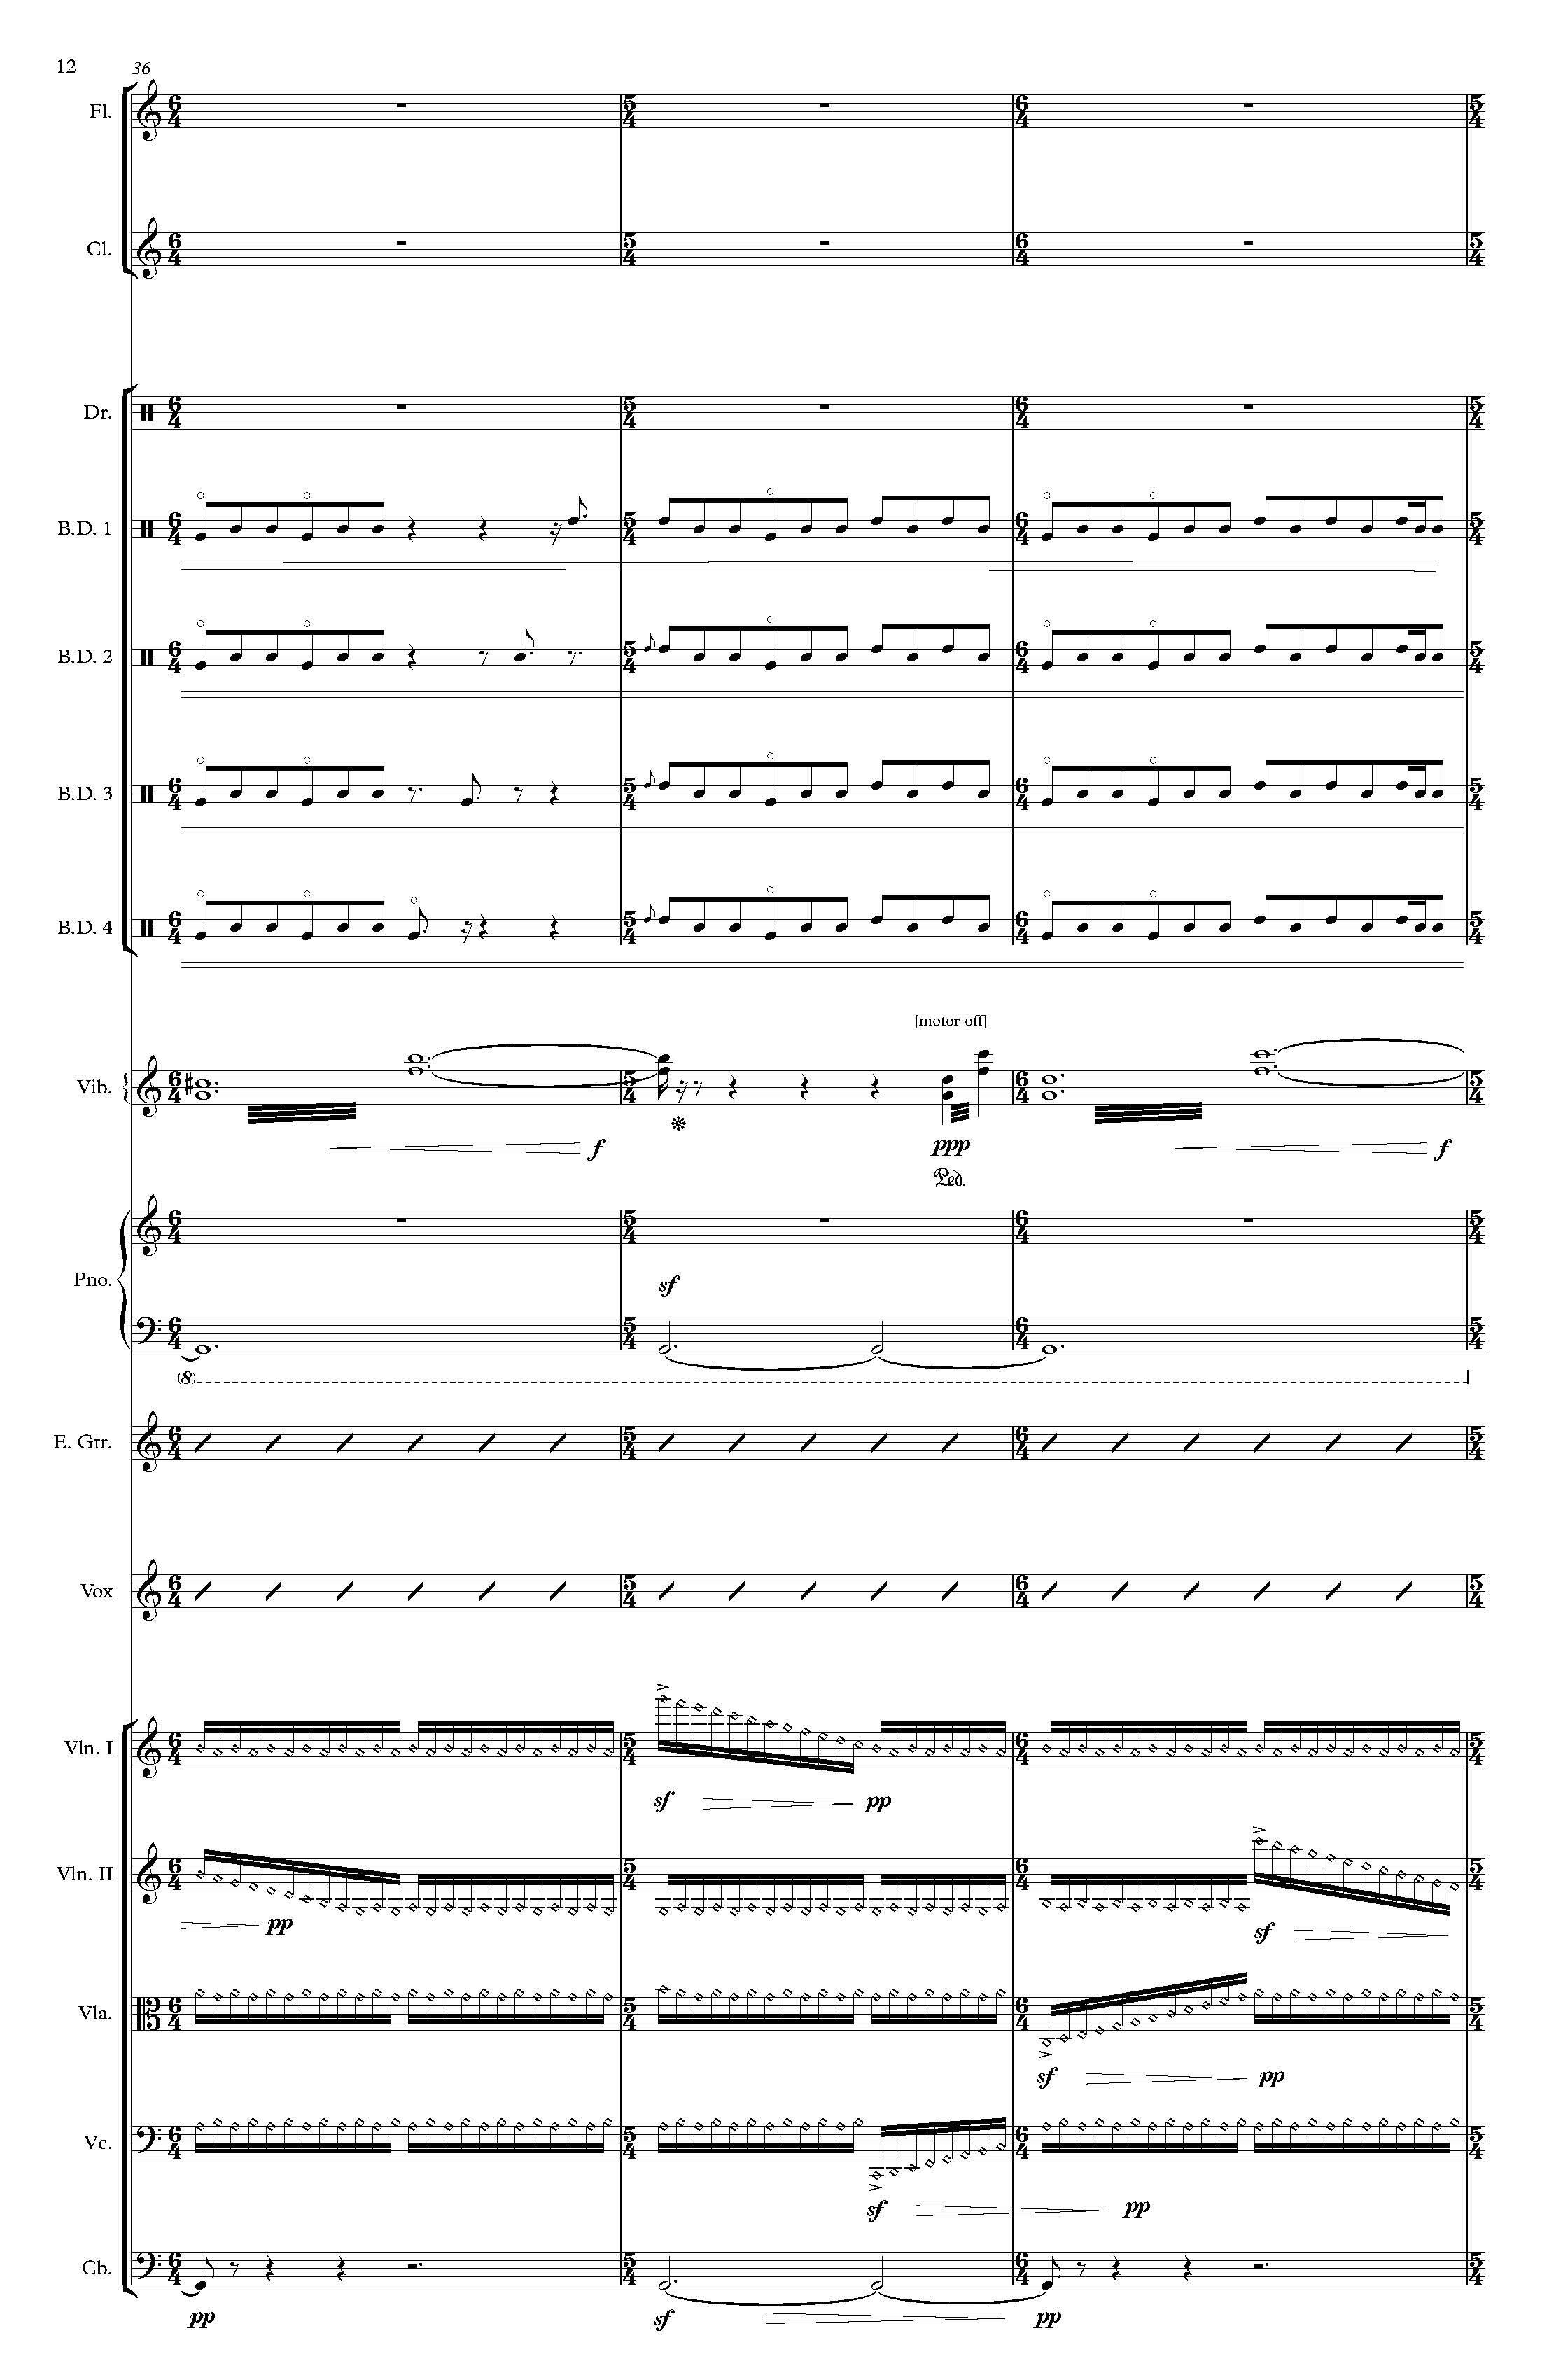 The Rembrandt of Avenue A - Complete Score_Page_18.jpg